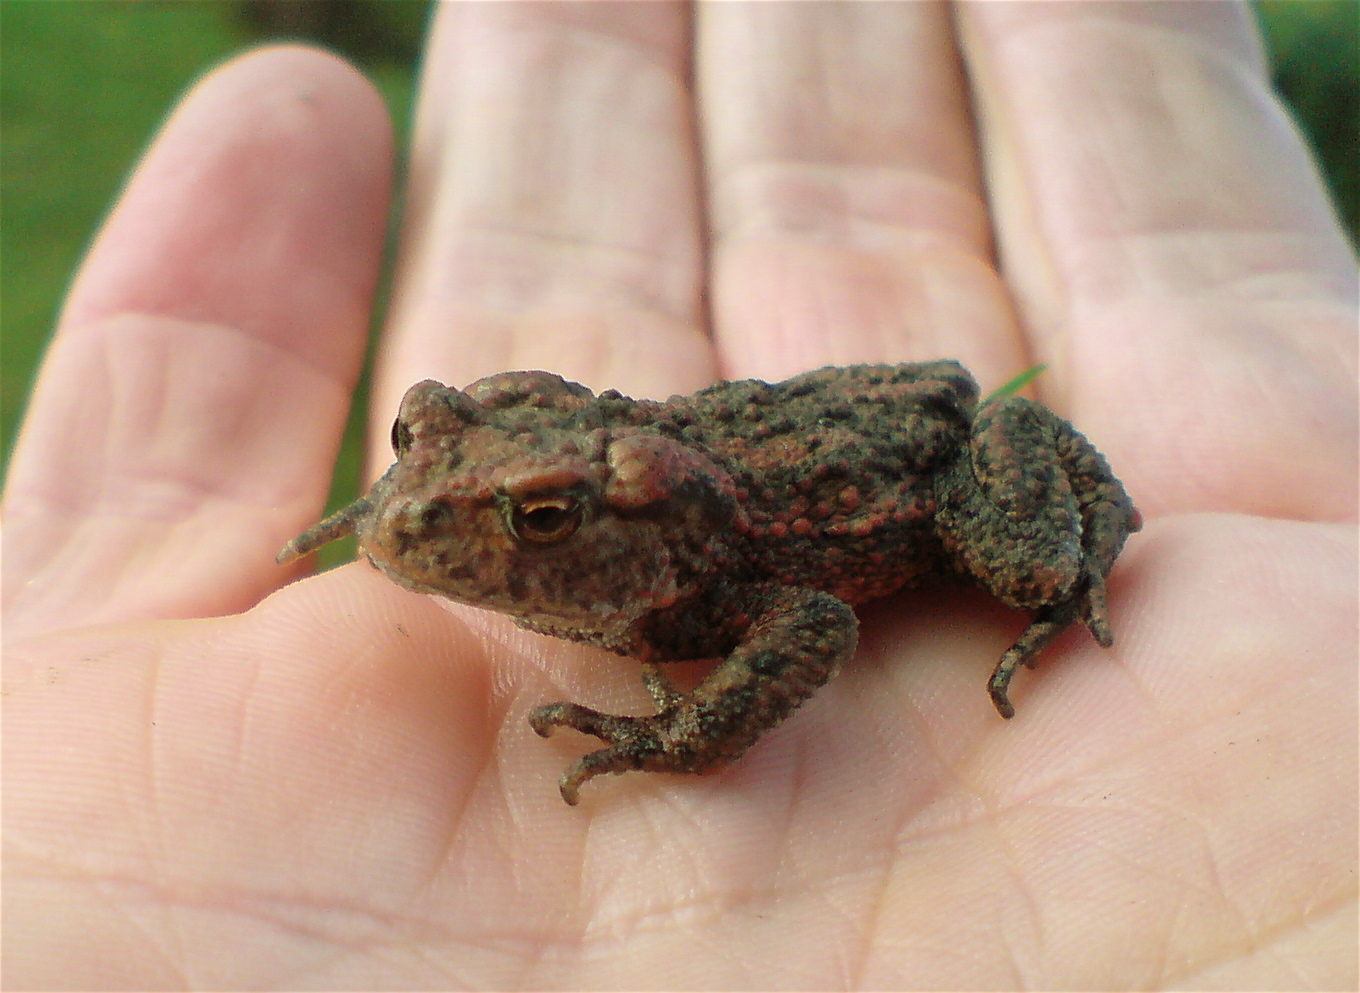 a frog sitting in a persons hand while outside